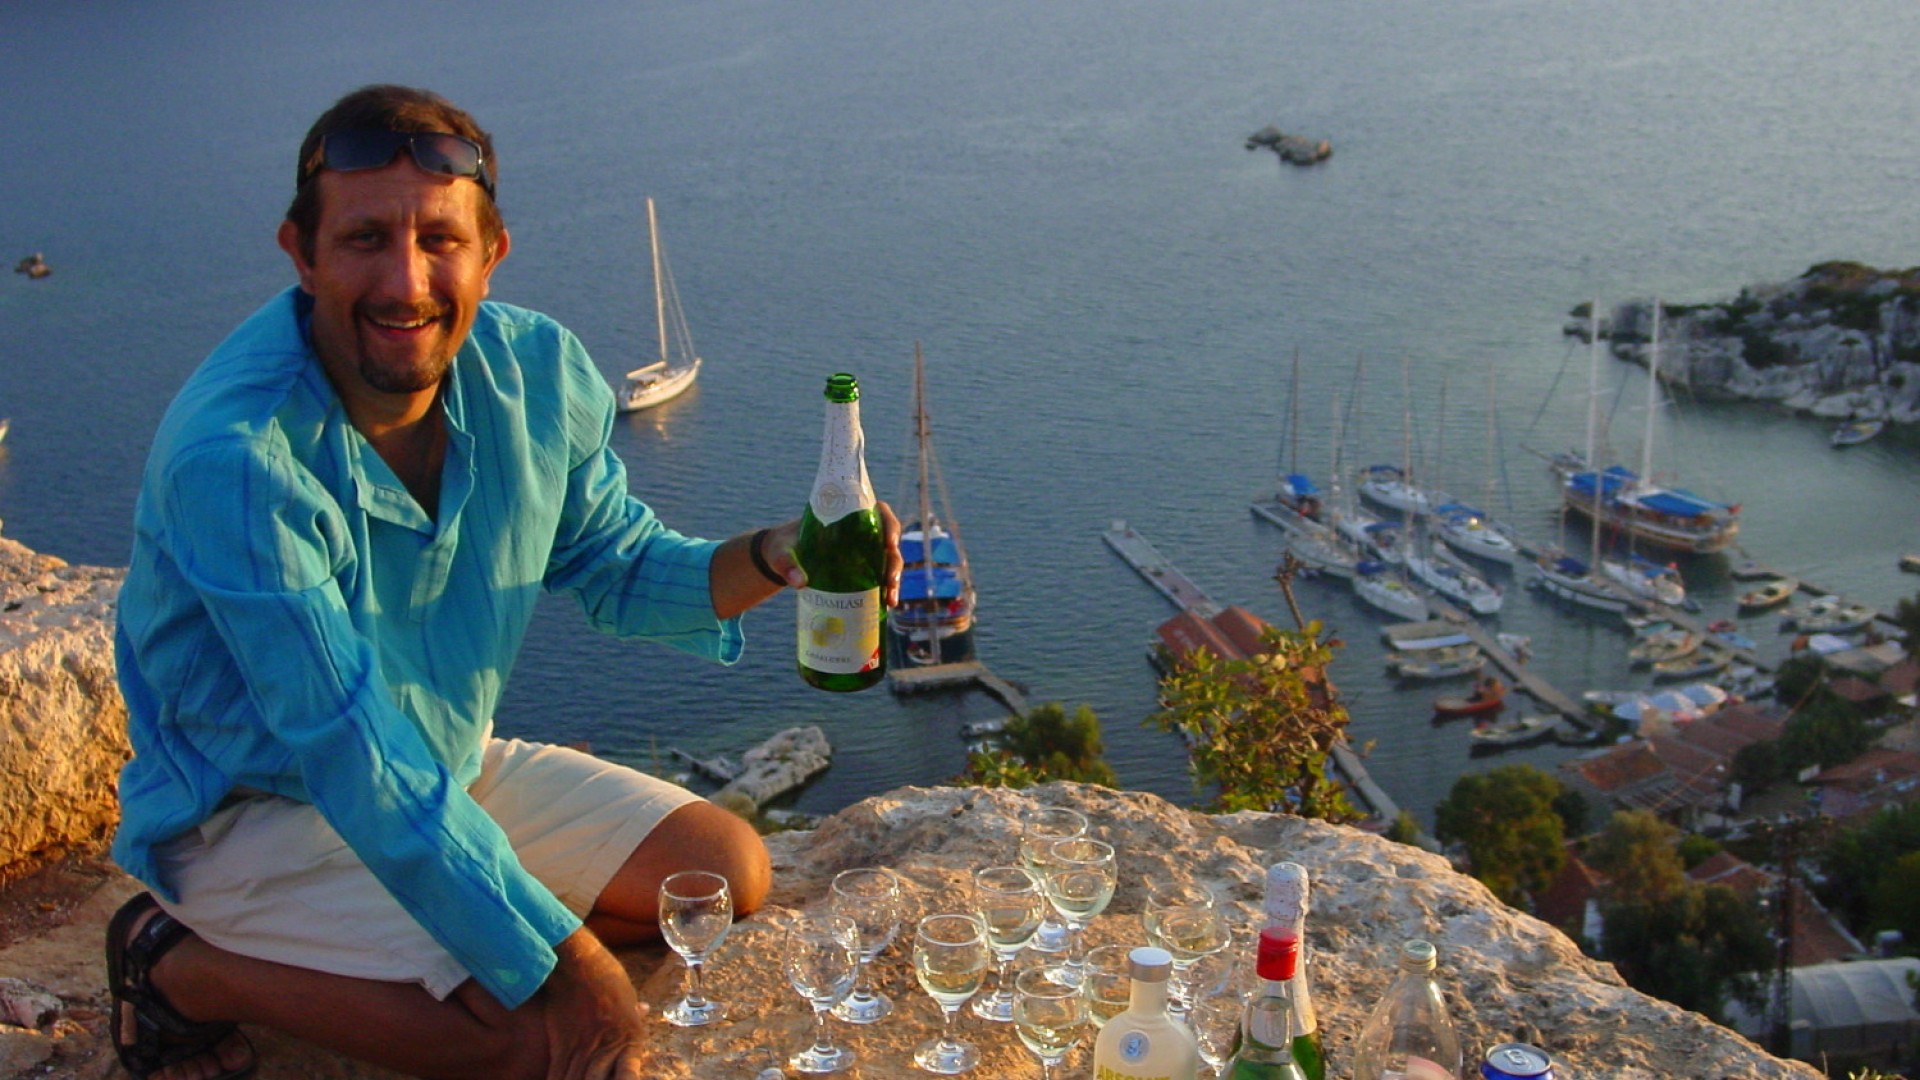 Turkish tour guide at the top of a hike overlooking the water with boats in it serving wine to guests